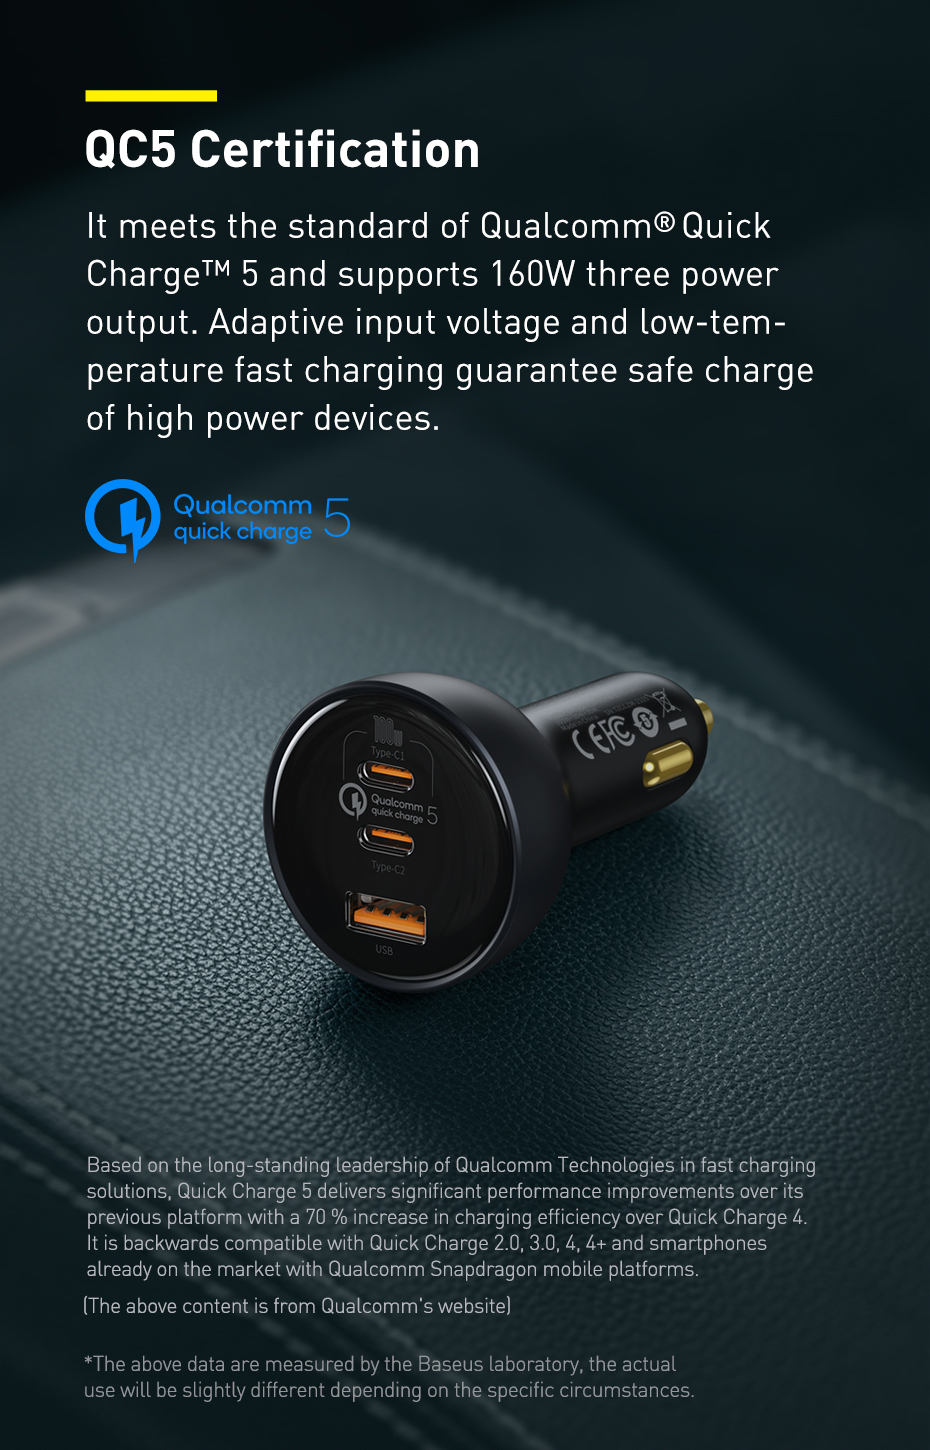 QC5-Tech-Baseus-160W-Quick-Chargetrade-5-Technology-BPS20-USB-Car-Charger-With-100W-PPS-USB-C--30W-U-1936771-2